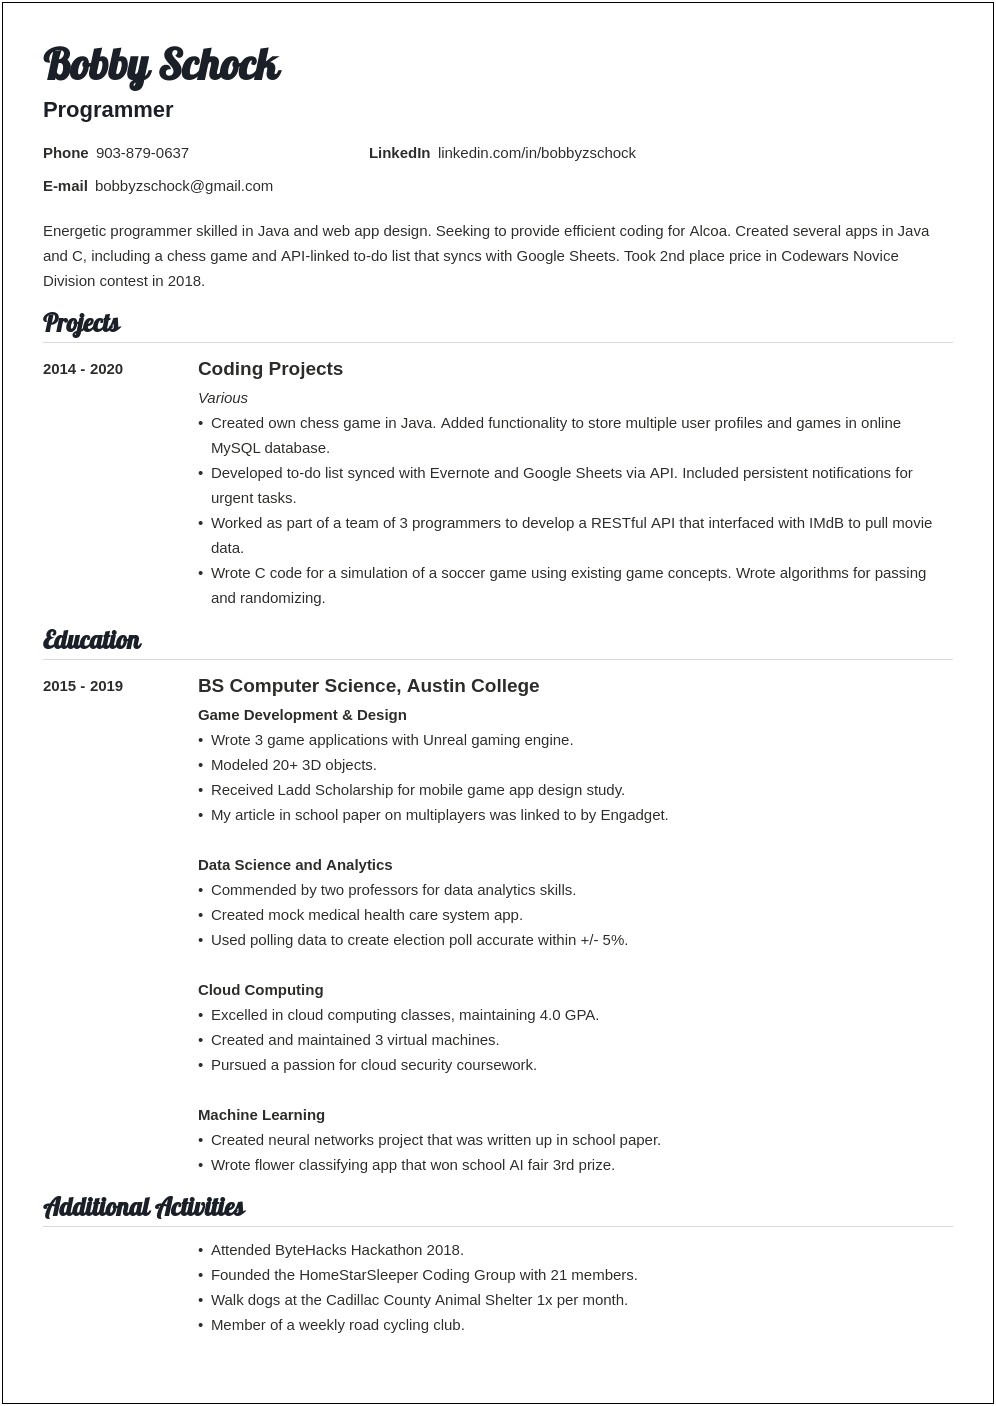 Should Skills Or Experience Come First On Resume